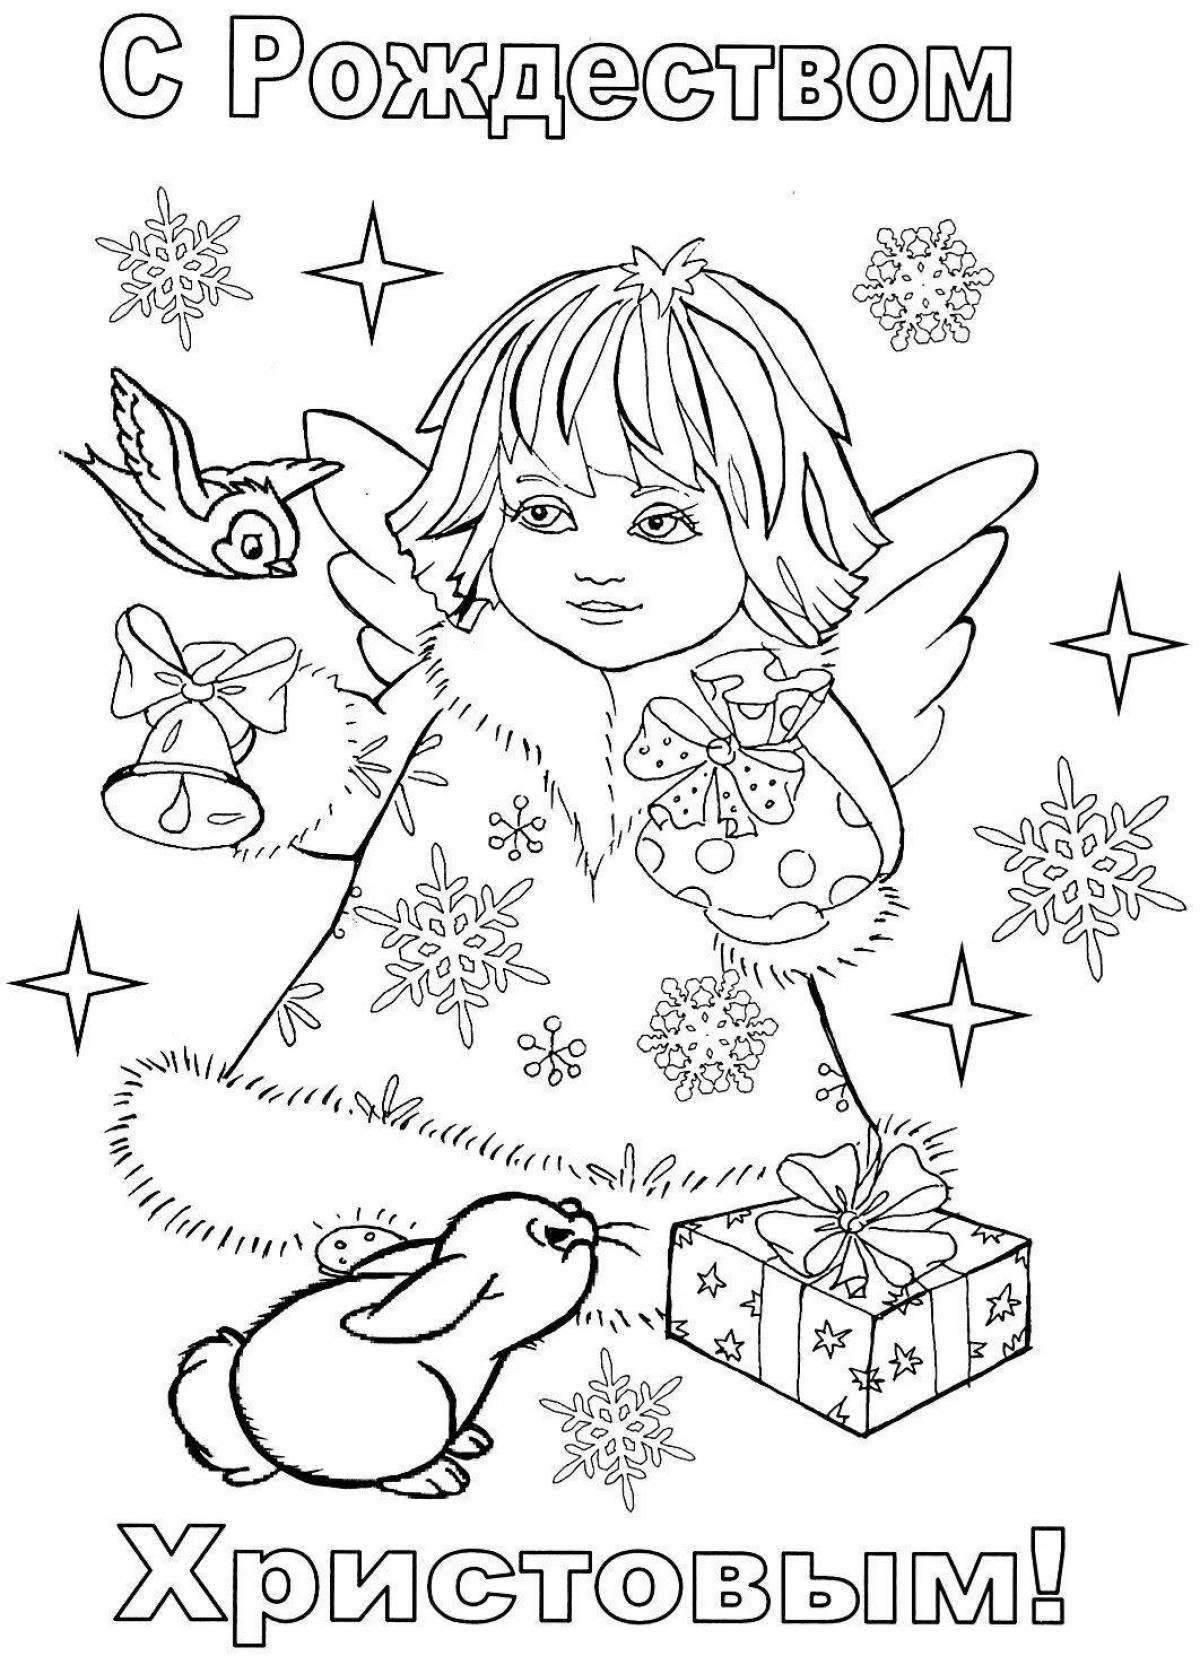 Awesome merry christmas coloring book